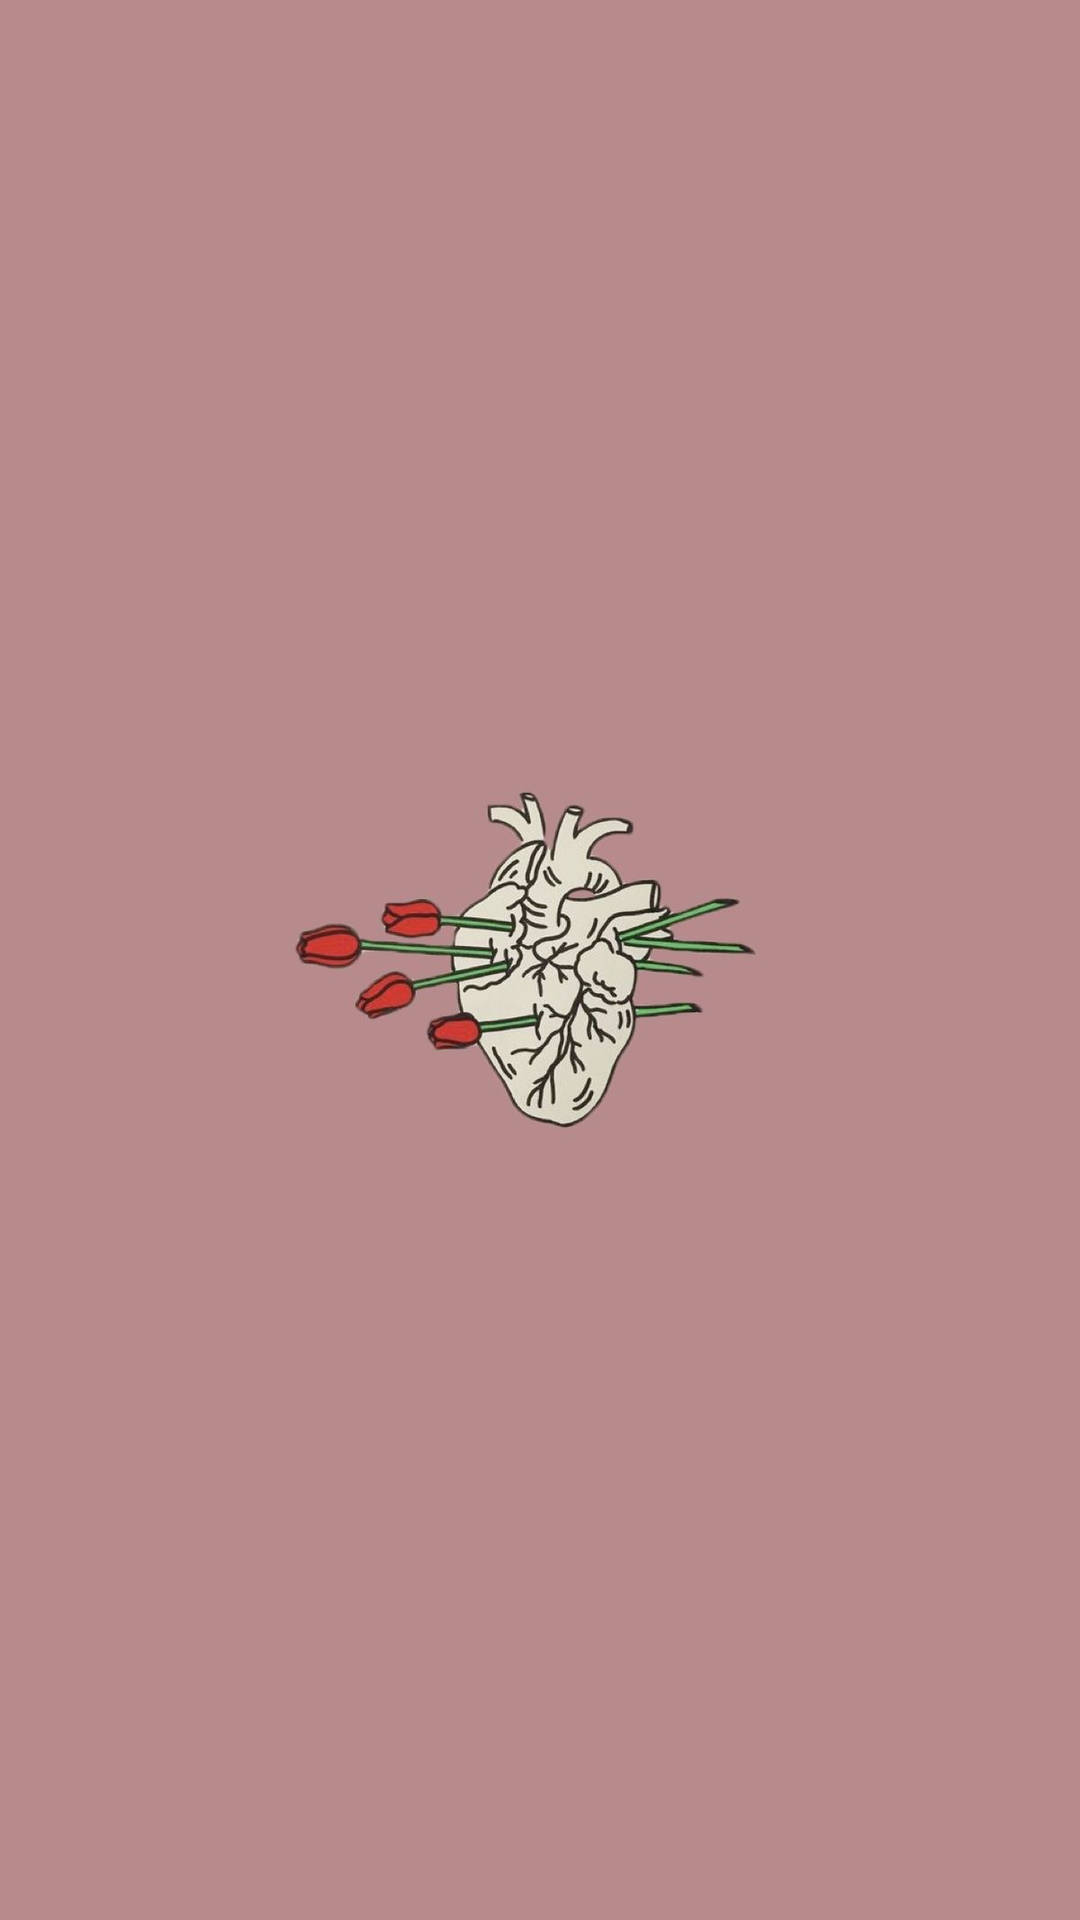 Aesthetic Heart With Red Roses Background